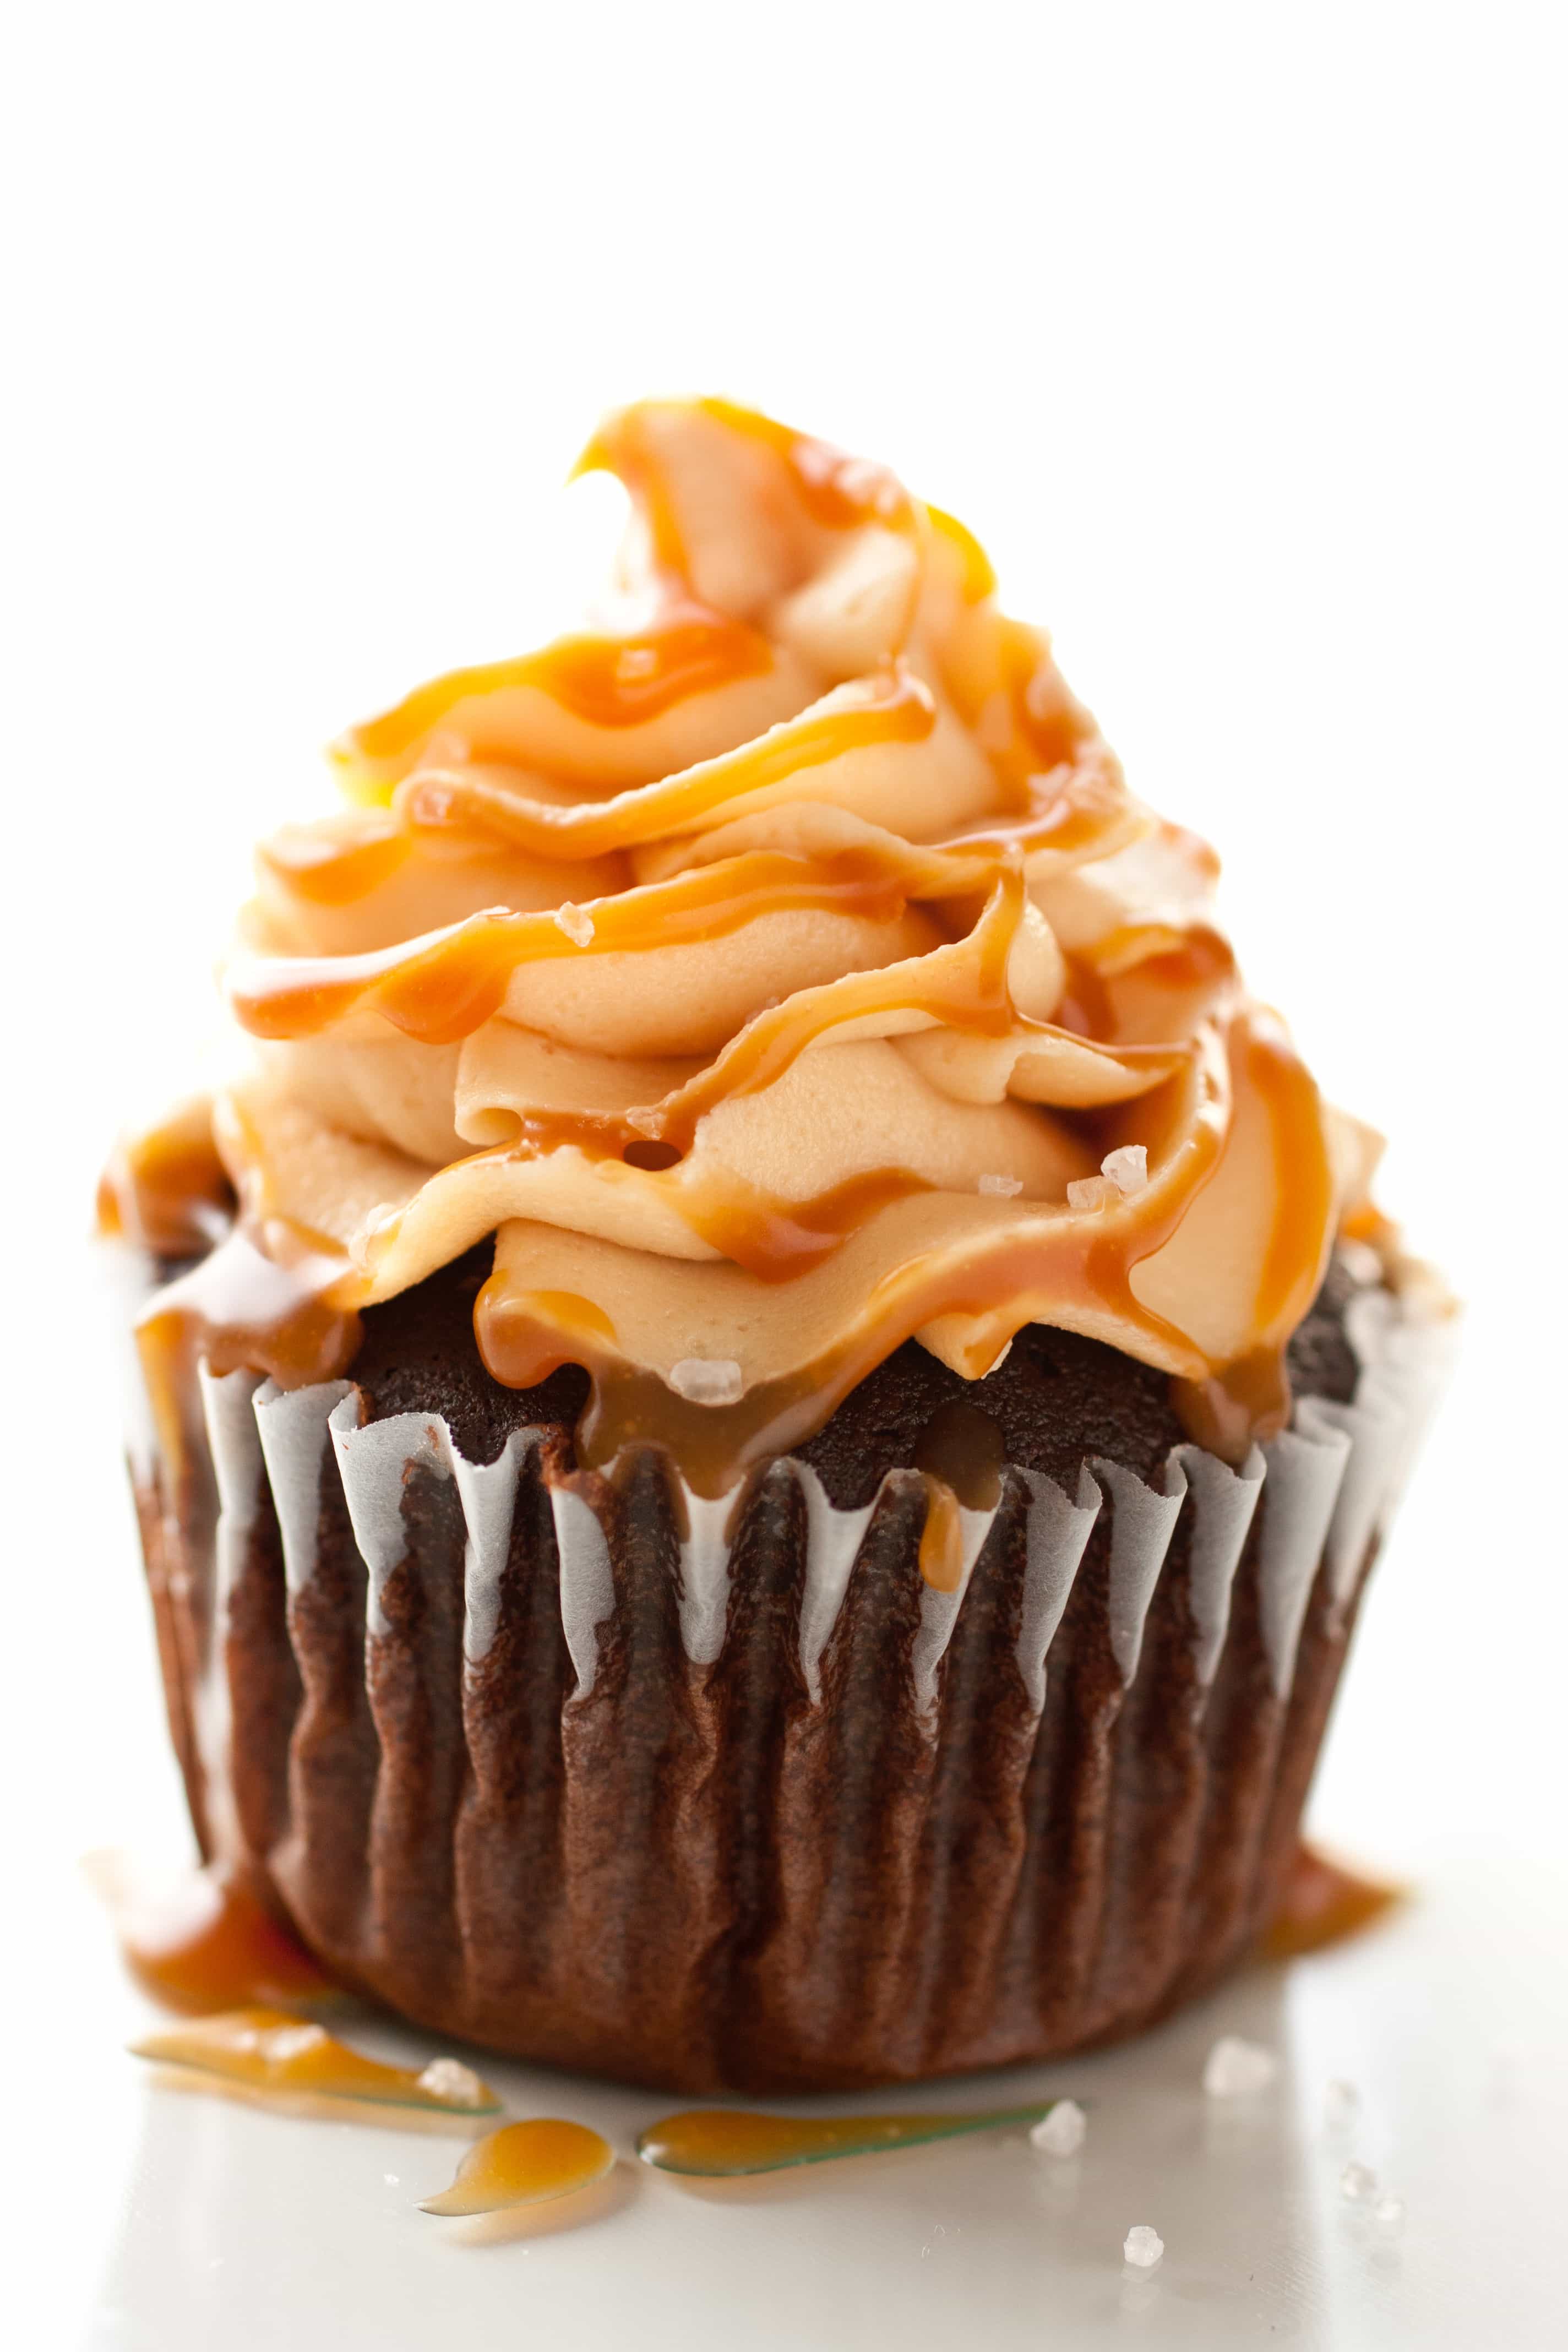 Chocolate Cupcakes with Salted Caramel Frosting - Cooking Classy